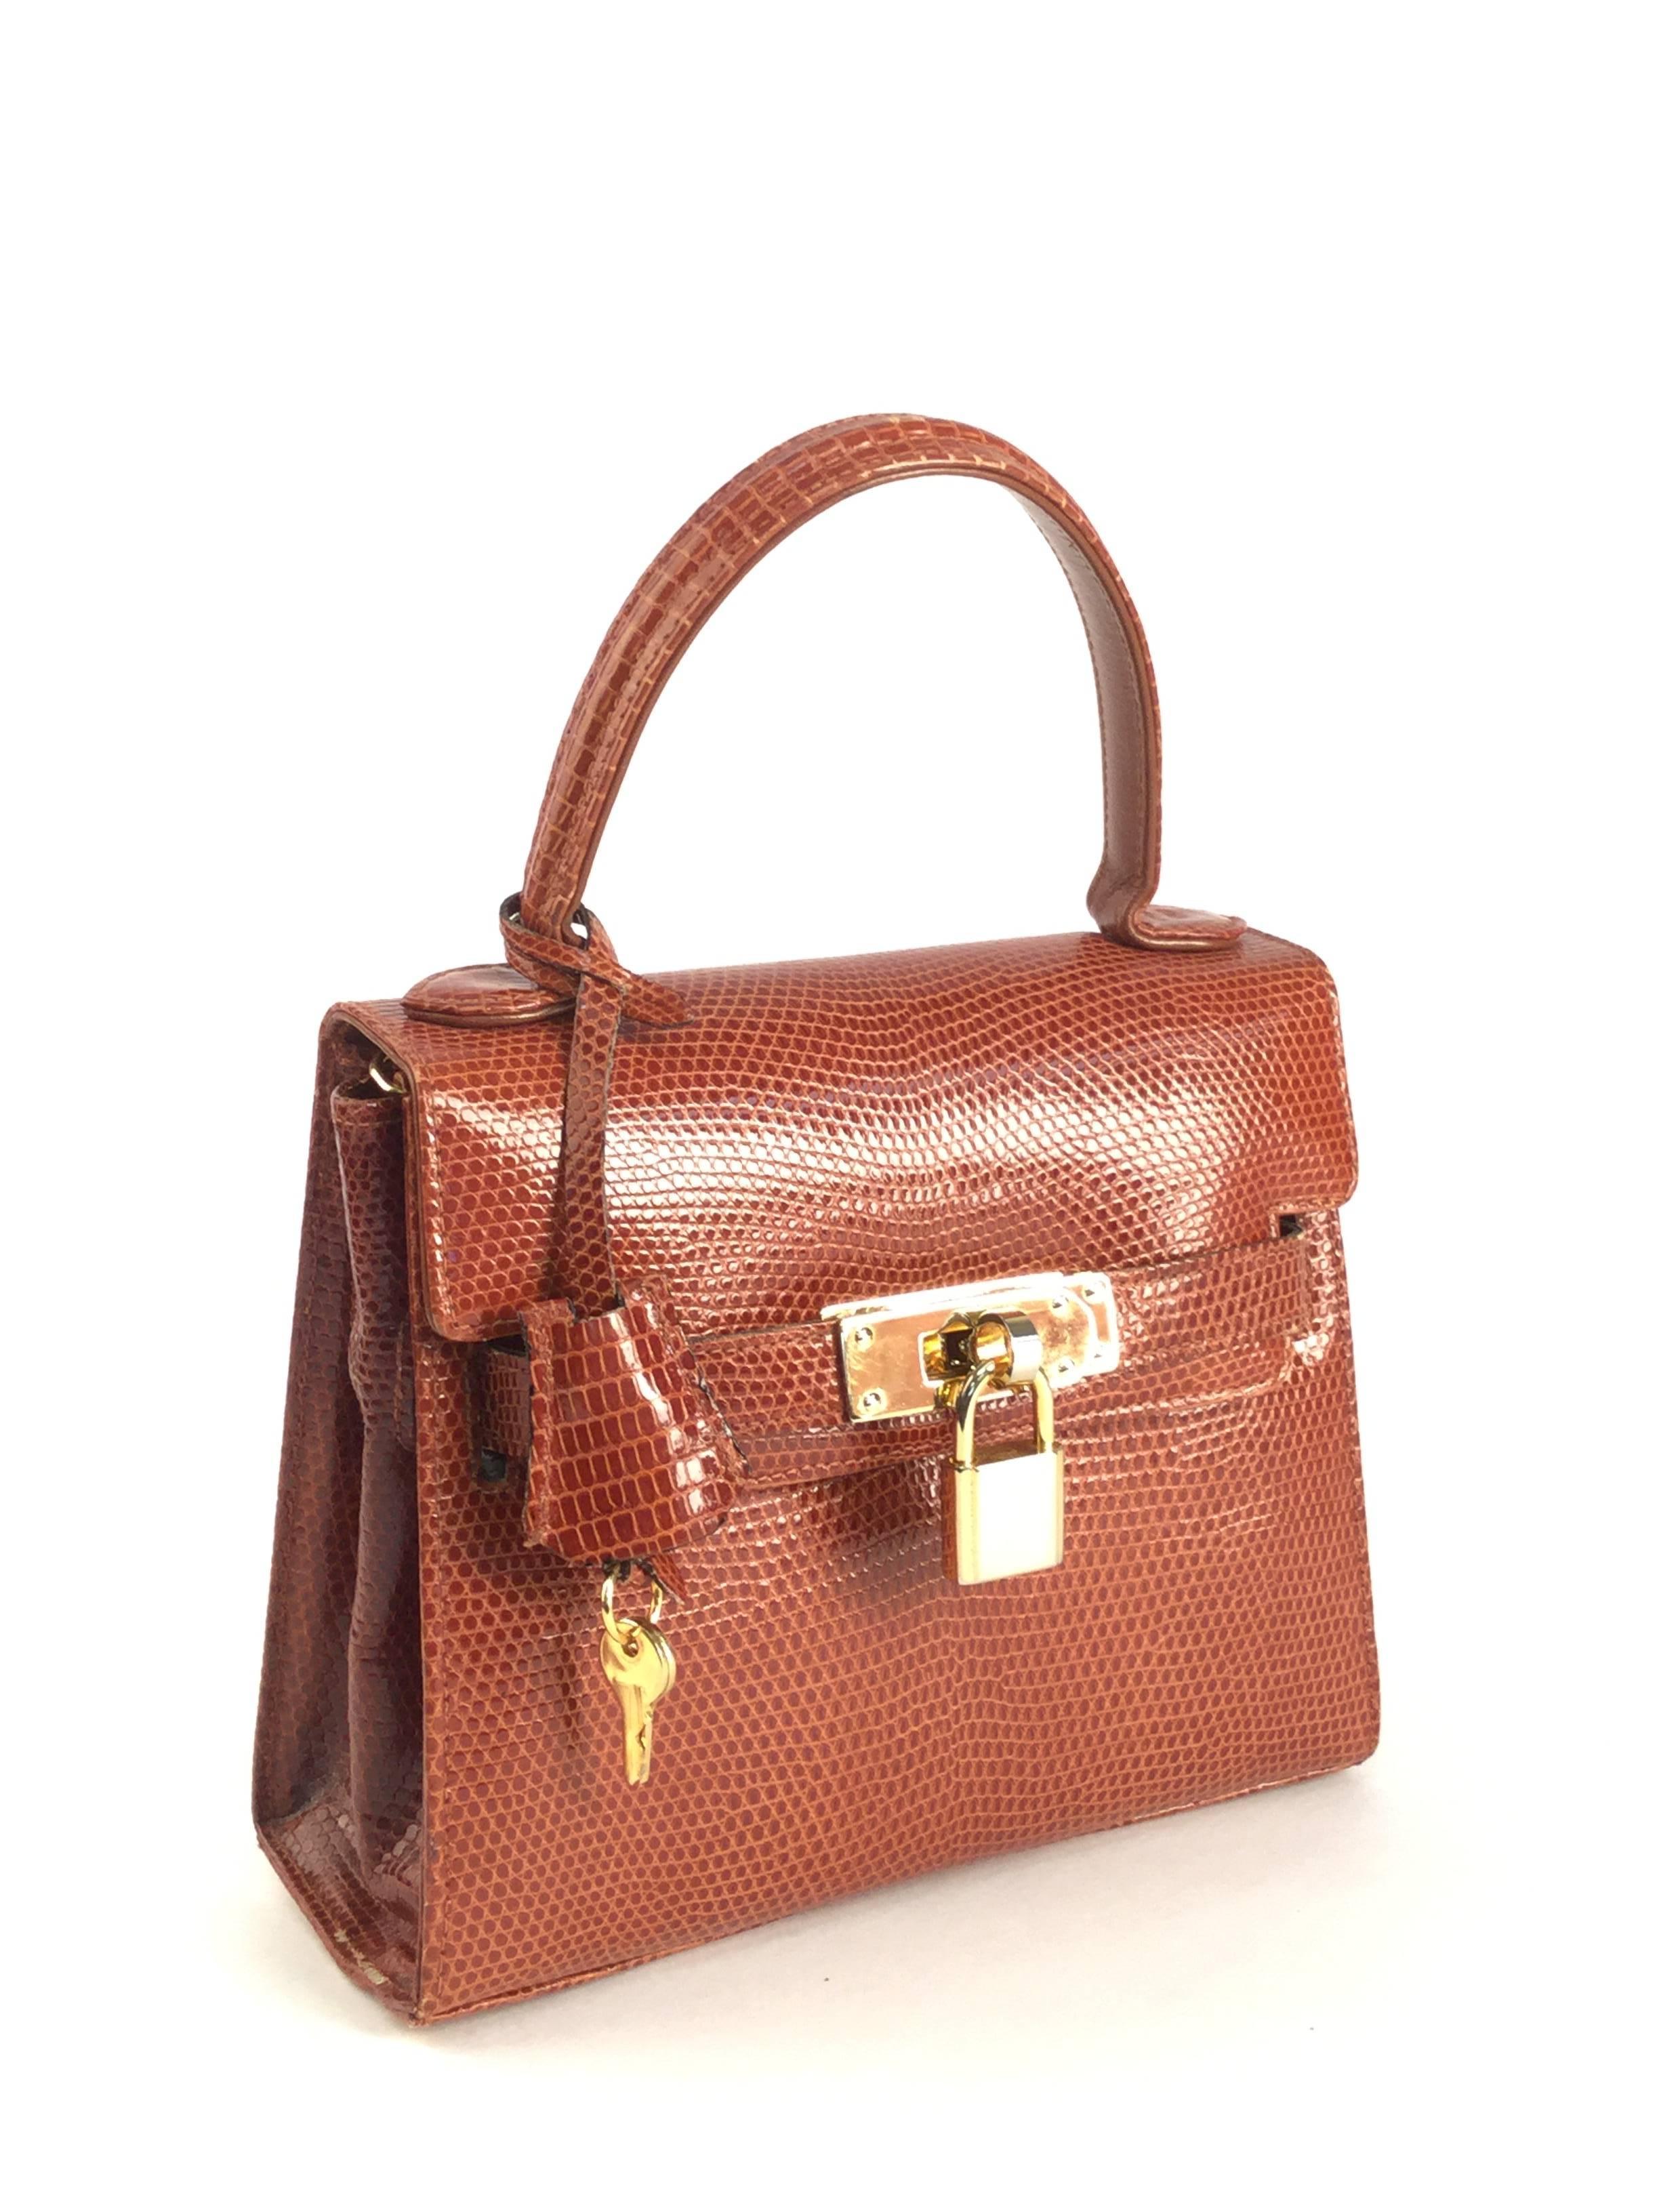 Vintage Finesse la Modele Top Handle Double Strap and Lock Lizard Leather Handbag. Absolutely gorgeous vintage handbag by Finesse la Modele! This handbag has a top handle, two straps that wrap around the flap to secure the circular twist closure,